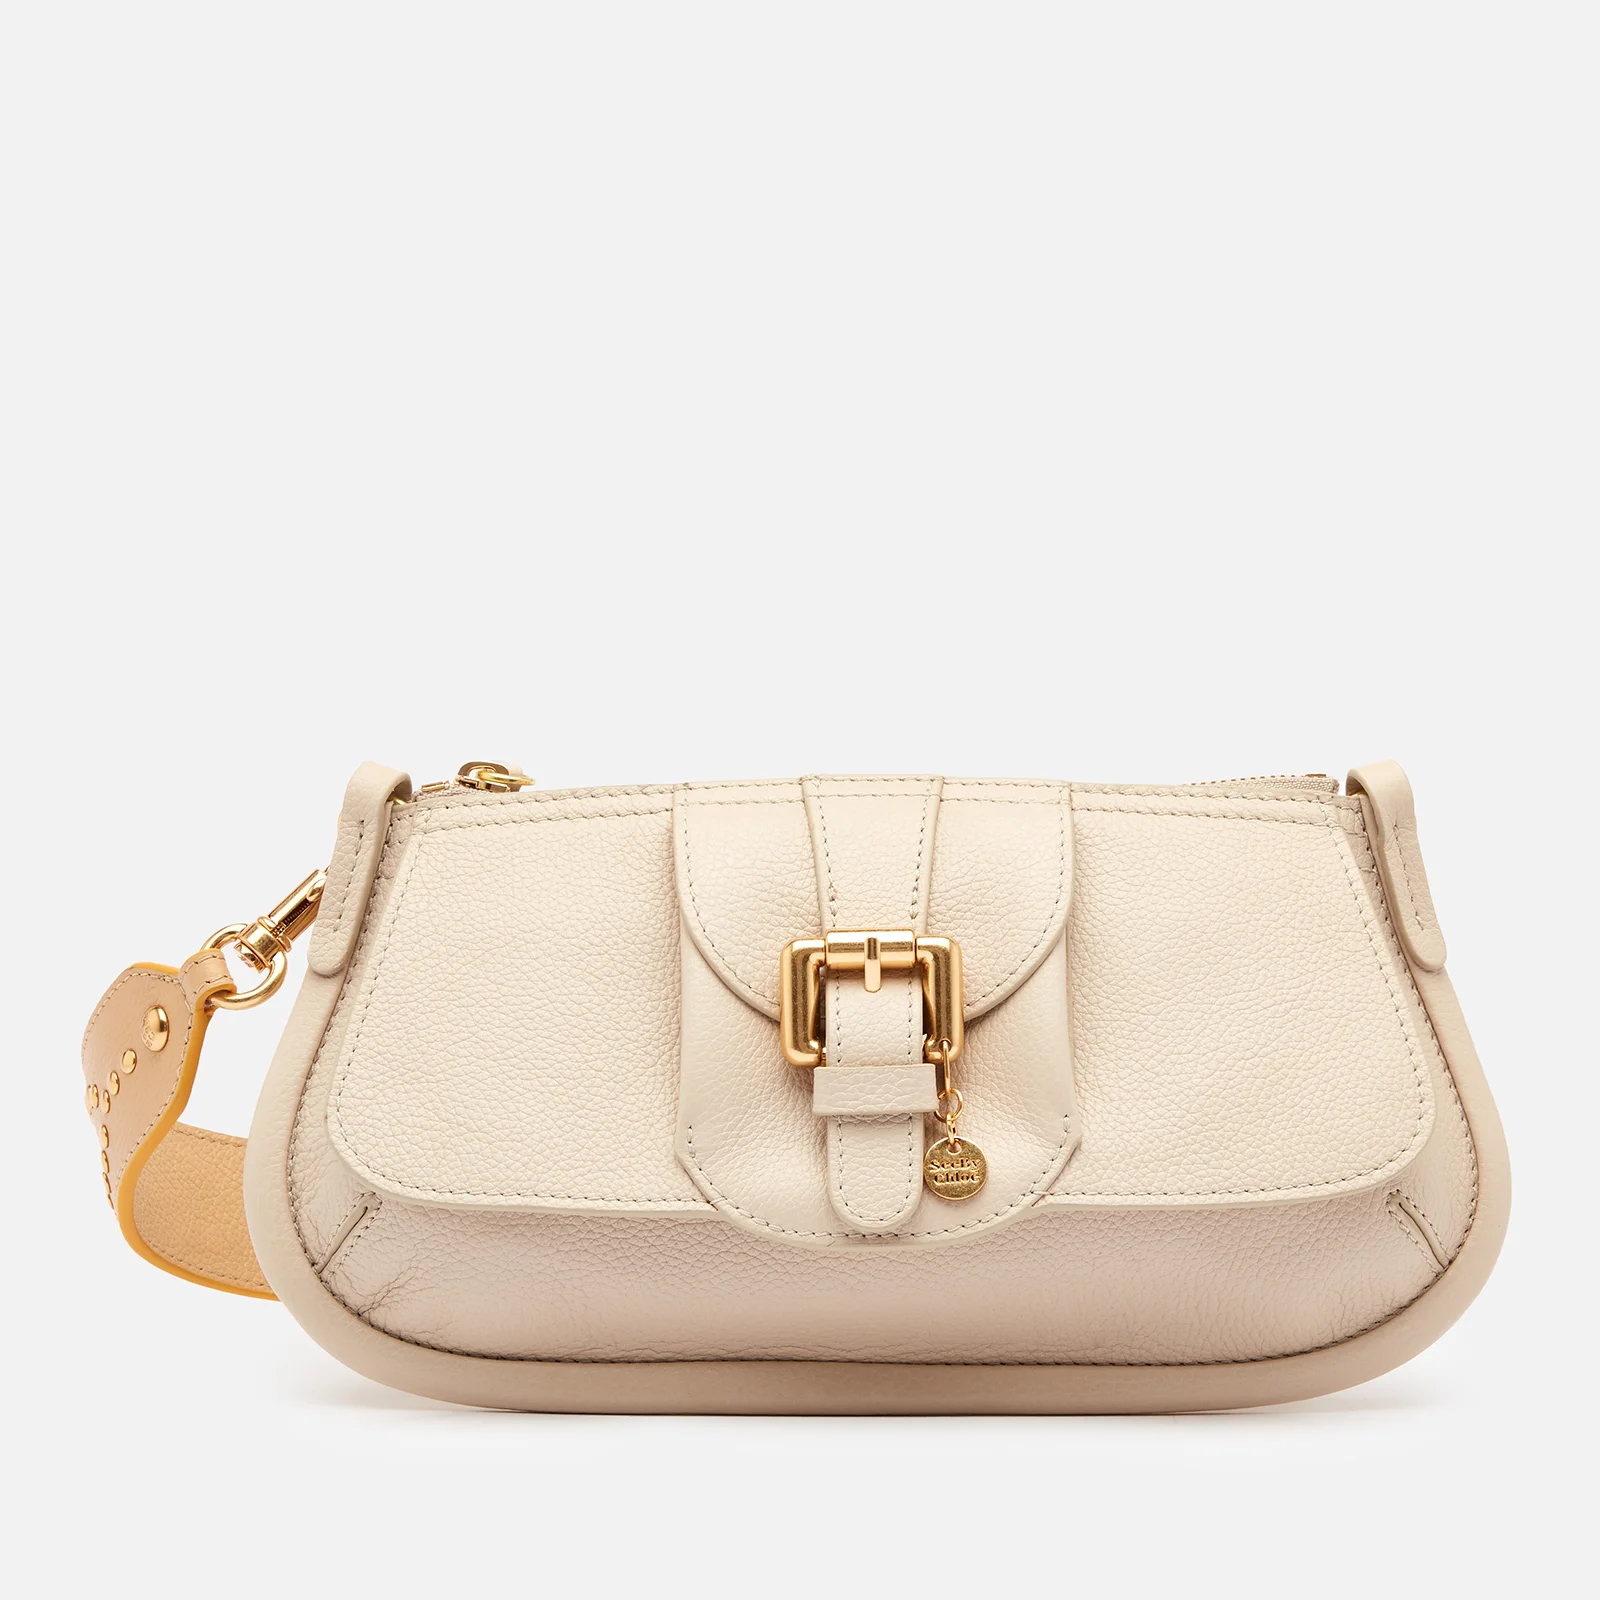 See by Chloé Women's Lesly Shoulder Bag - Cement Beige Image 1